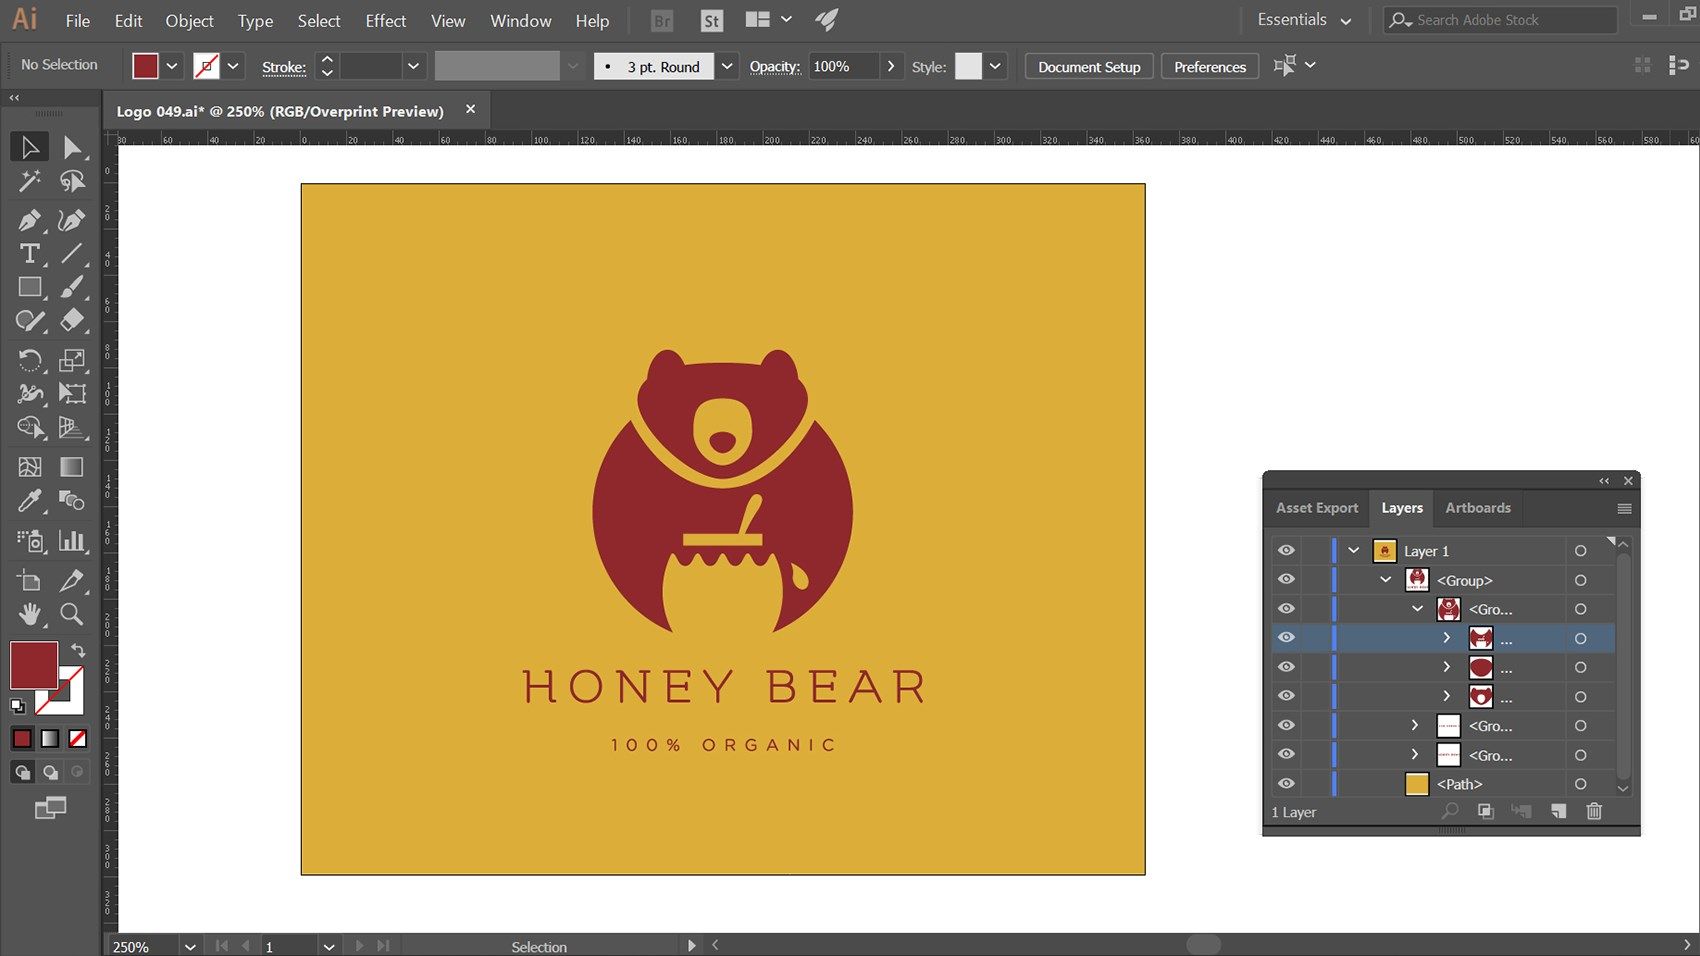 Logo Template opened with Adobe Illustrator and ready for editing.